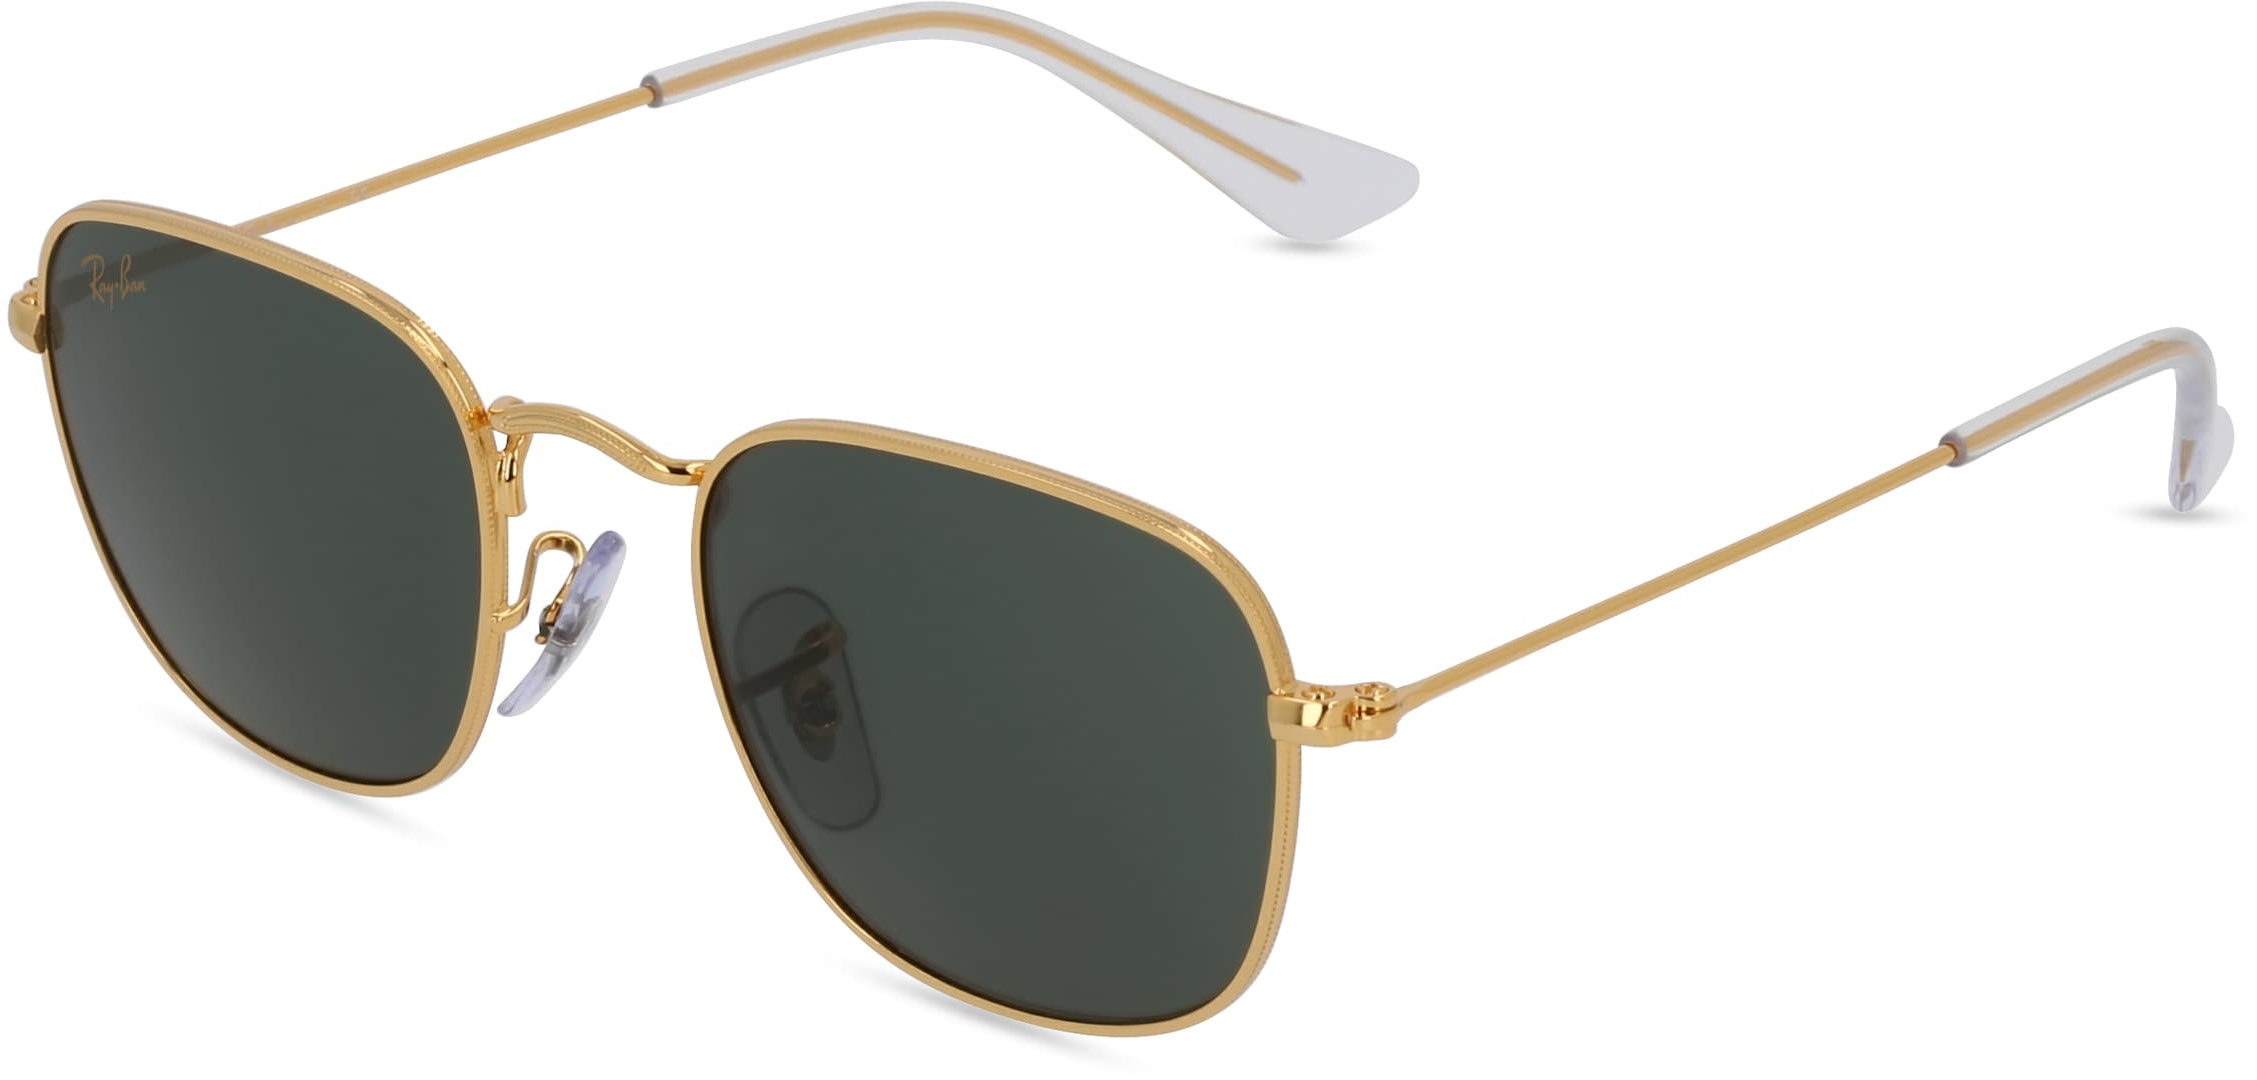 Ray-Ban Junior RJ 9557S FRANK Jugend-Sonnenbrille Vollrand Panto Metall-Gestell, gold